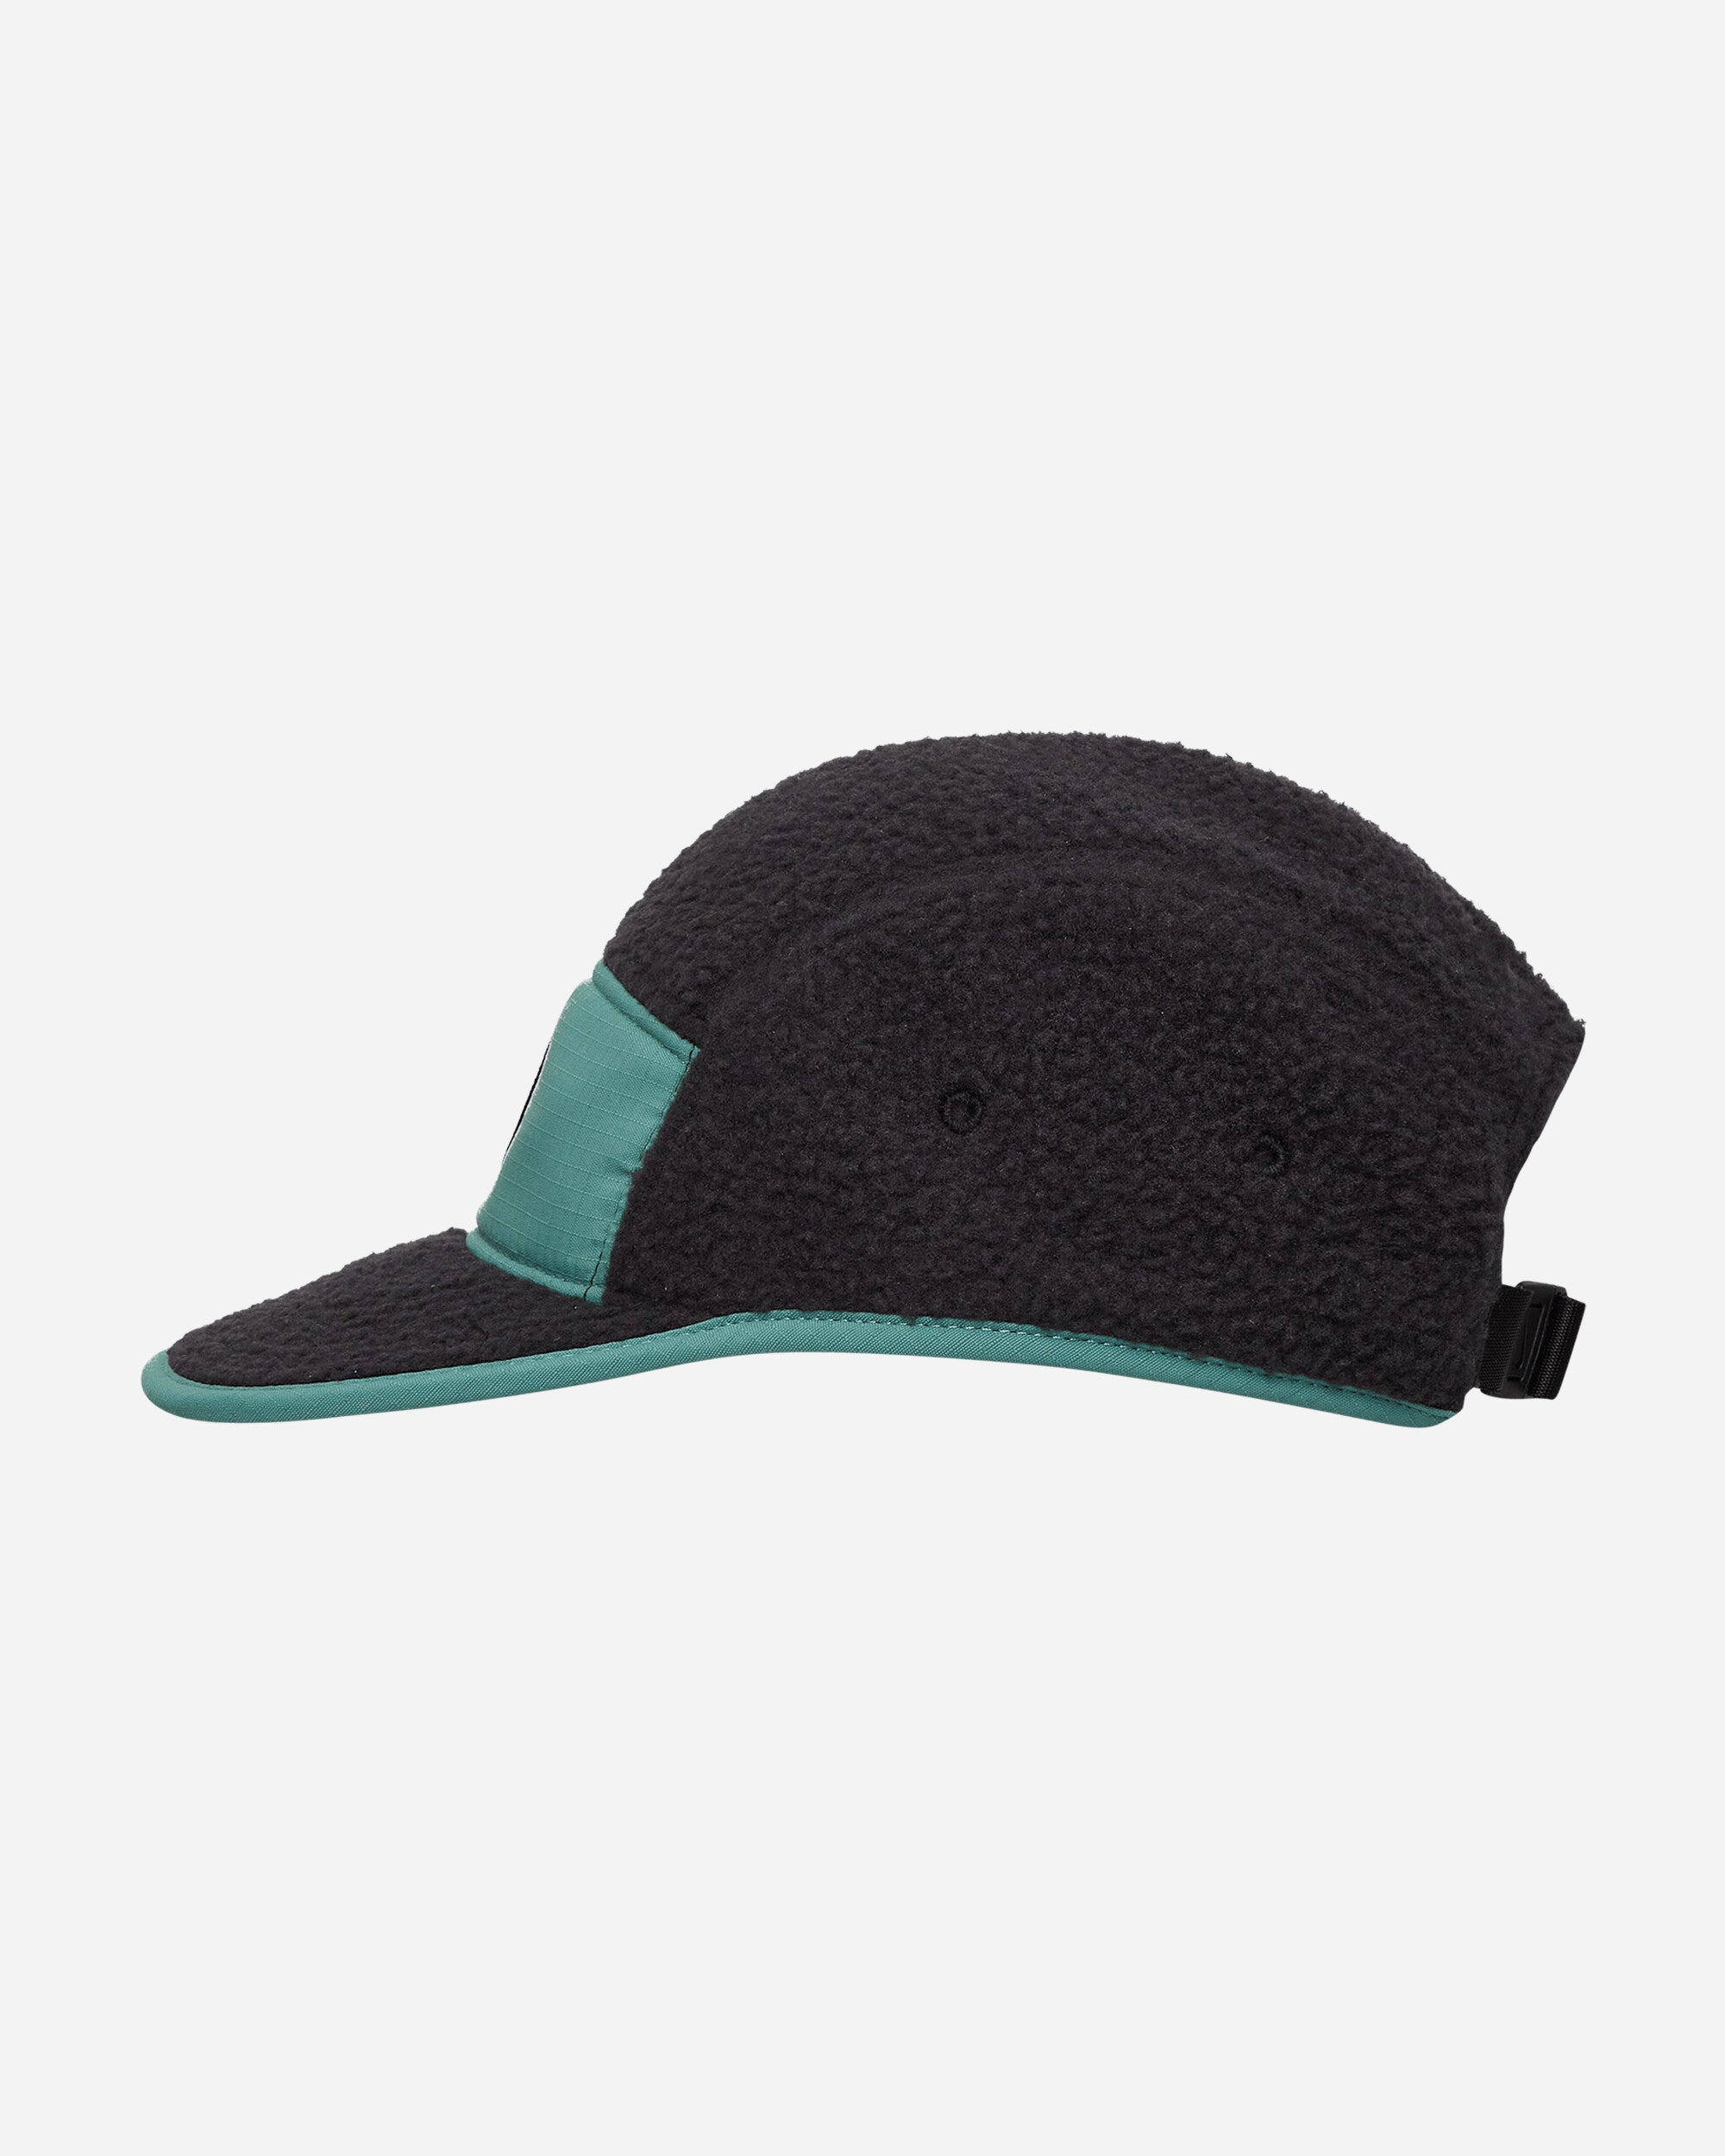 ACG Therma-FIT Fly Unstructured Cap Black / Bicoastal